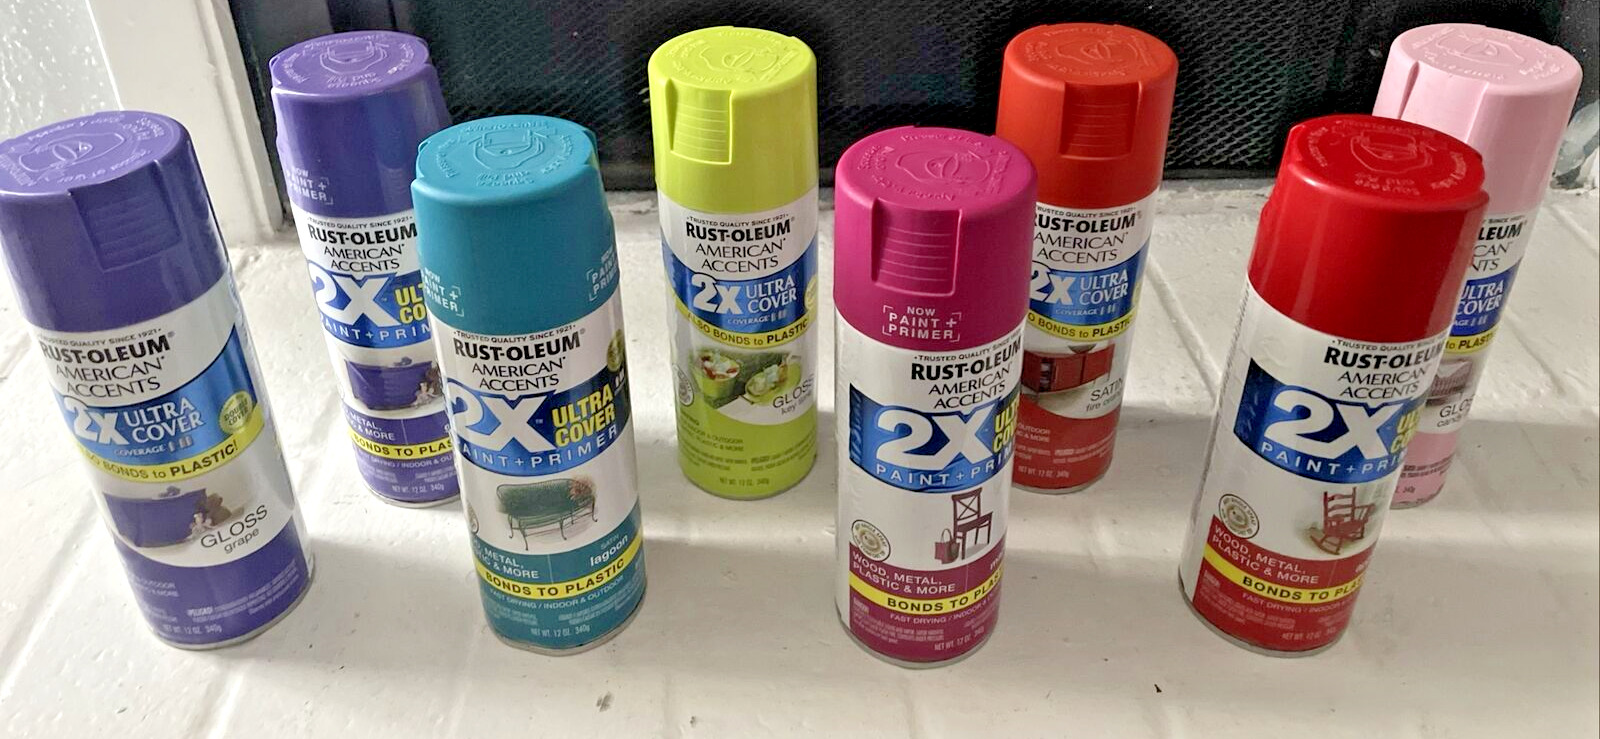 Rust-Oleum American Accents 2X Ultra Cover (8 CAN LOT) DIFFERENT COLORS NEW